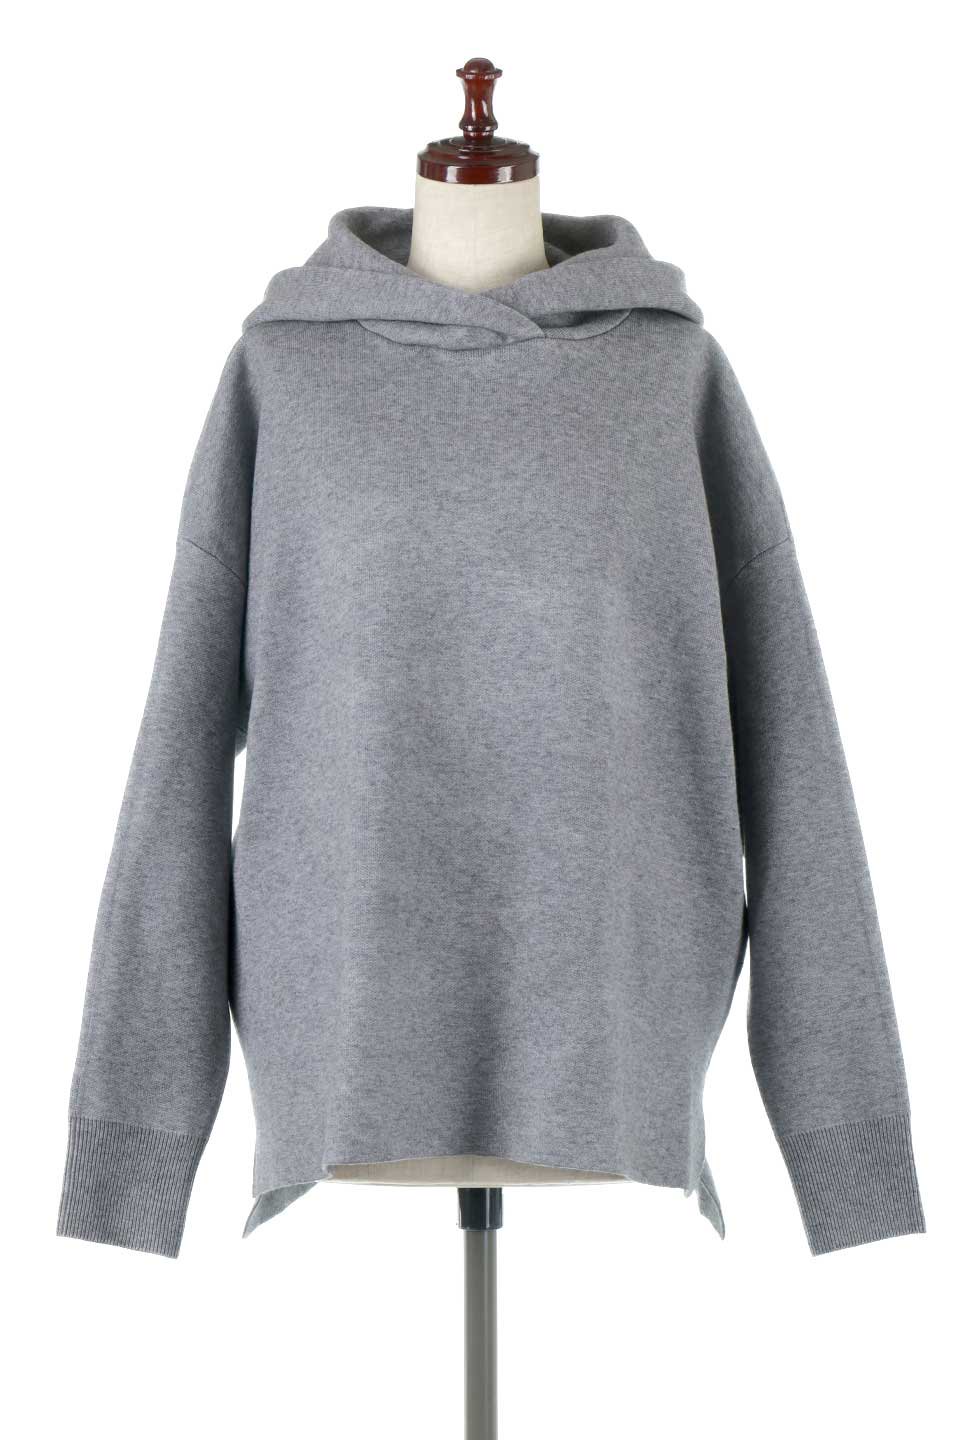 Over Sized Heavy Weight Knit Hoodie 肉厚・オーバーサイズニットパーカー